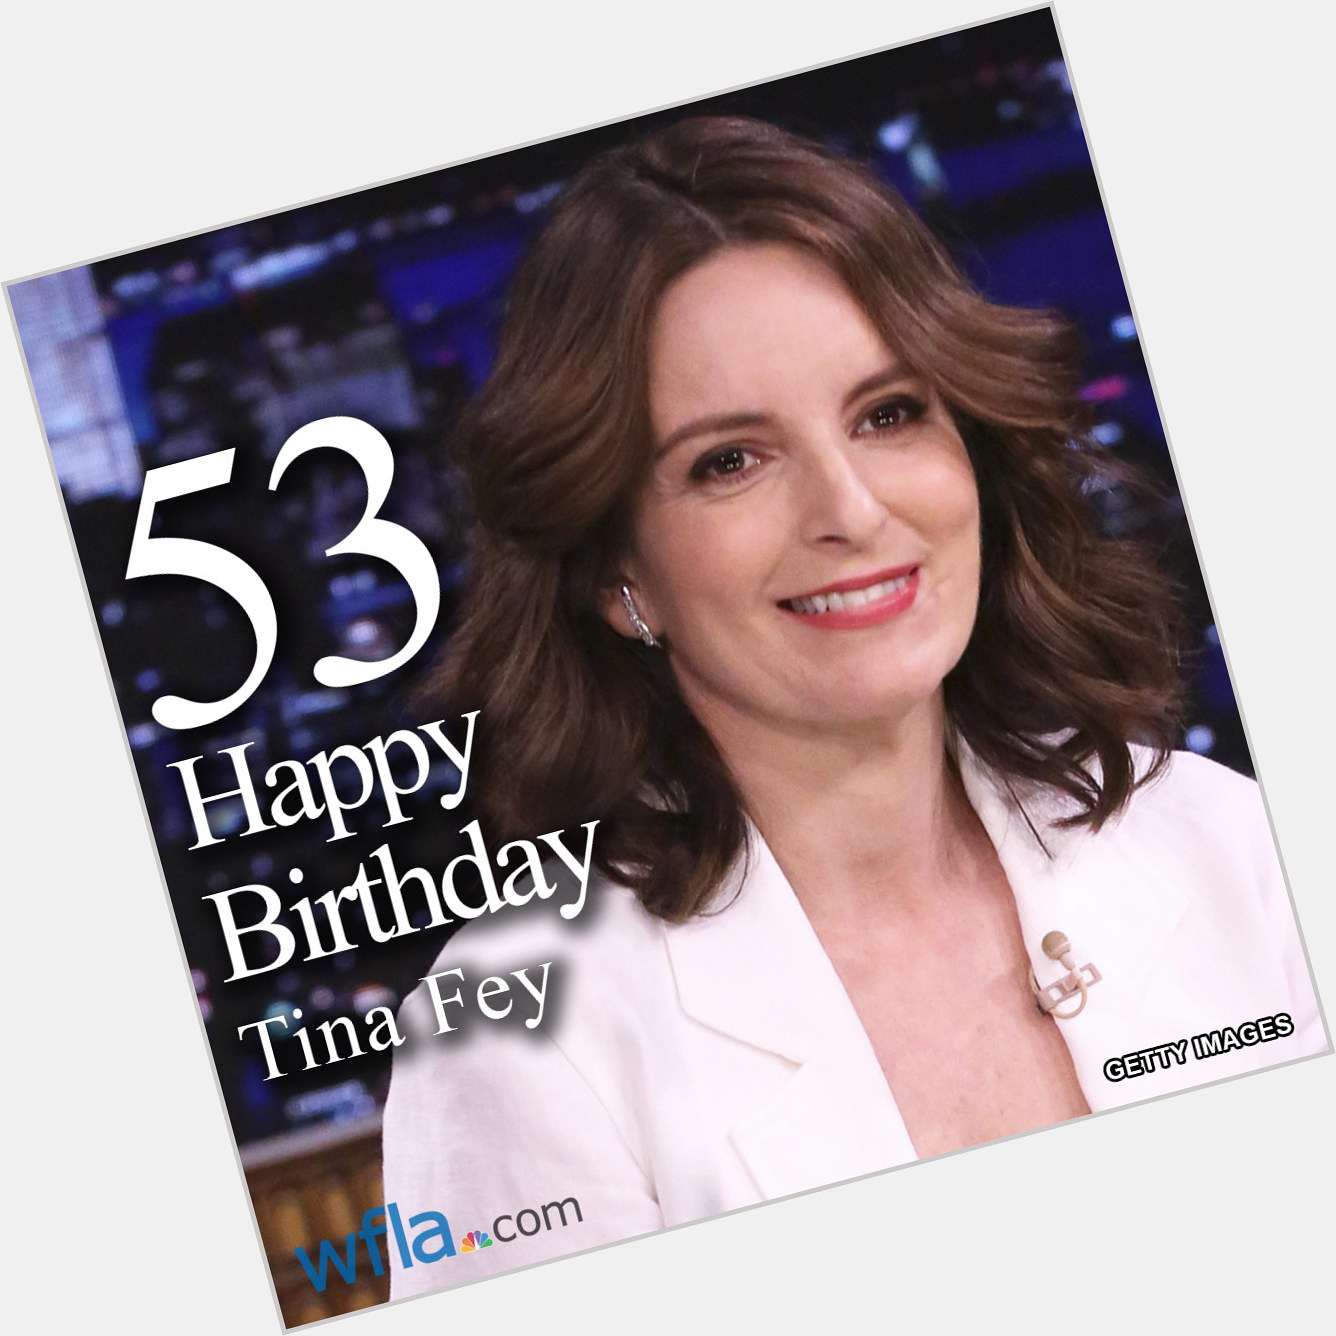 HAPPY BIRTHDAY, TINA FEY The Emmy Award-winning actress and comedian turns 53 today!  